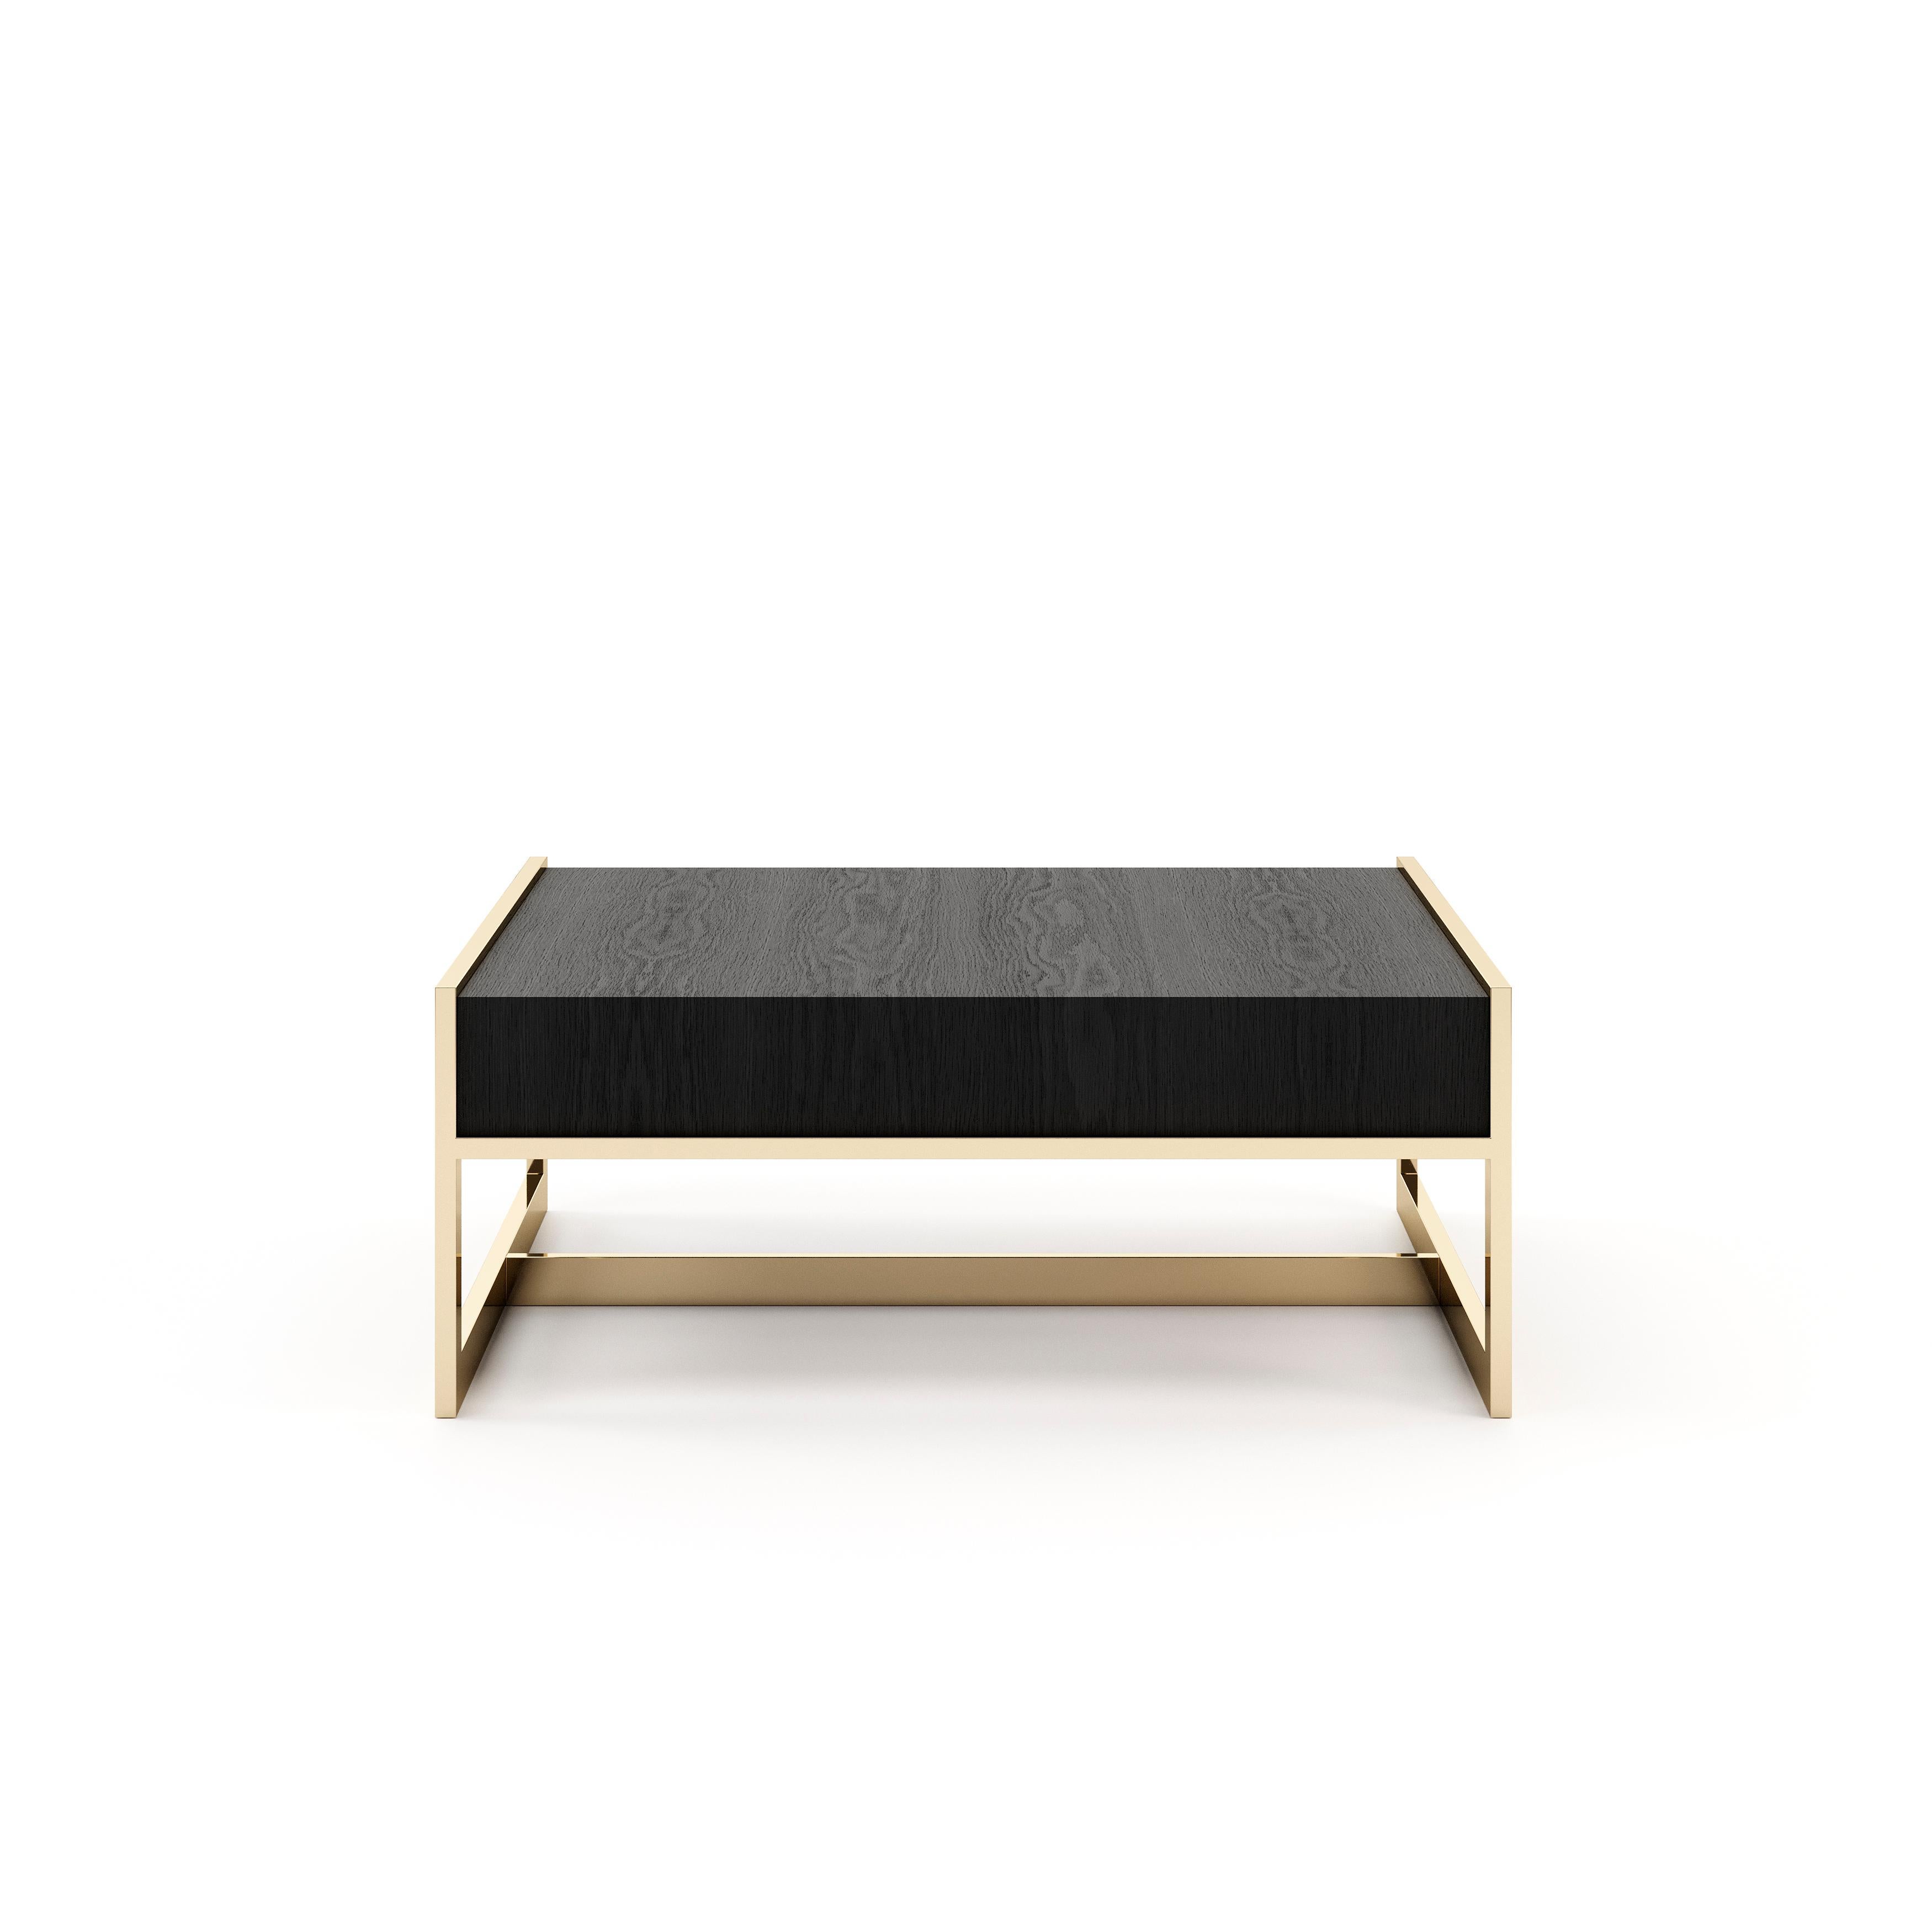 Anthony coffee table by Laskasas is a little extravagance for good design lovers. This charismatic center table combines wood and metal, shaped to create inviting rooms with a luxury soul. 

* Available in different finishes.
** Other custom sizes